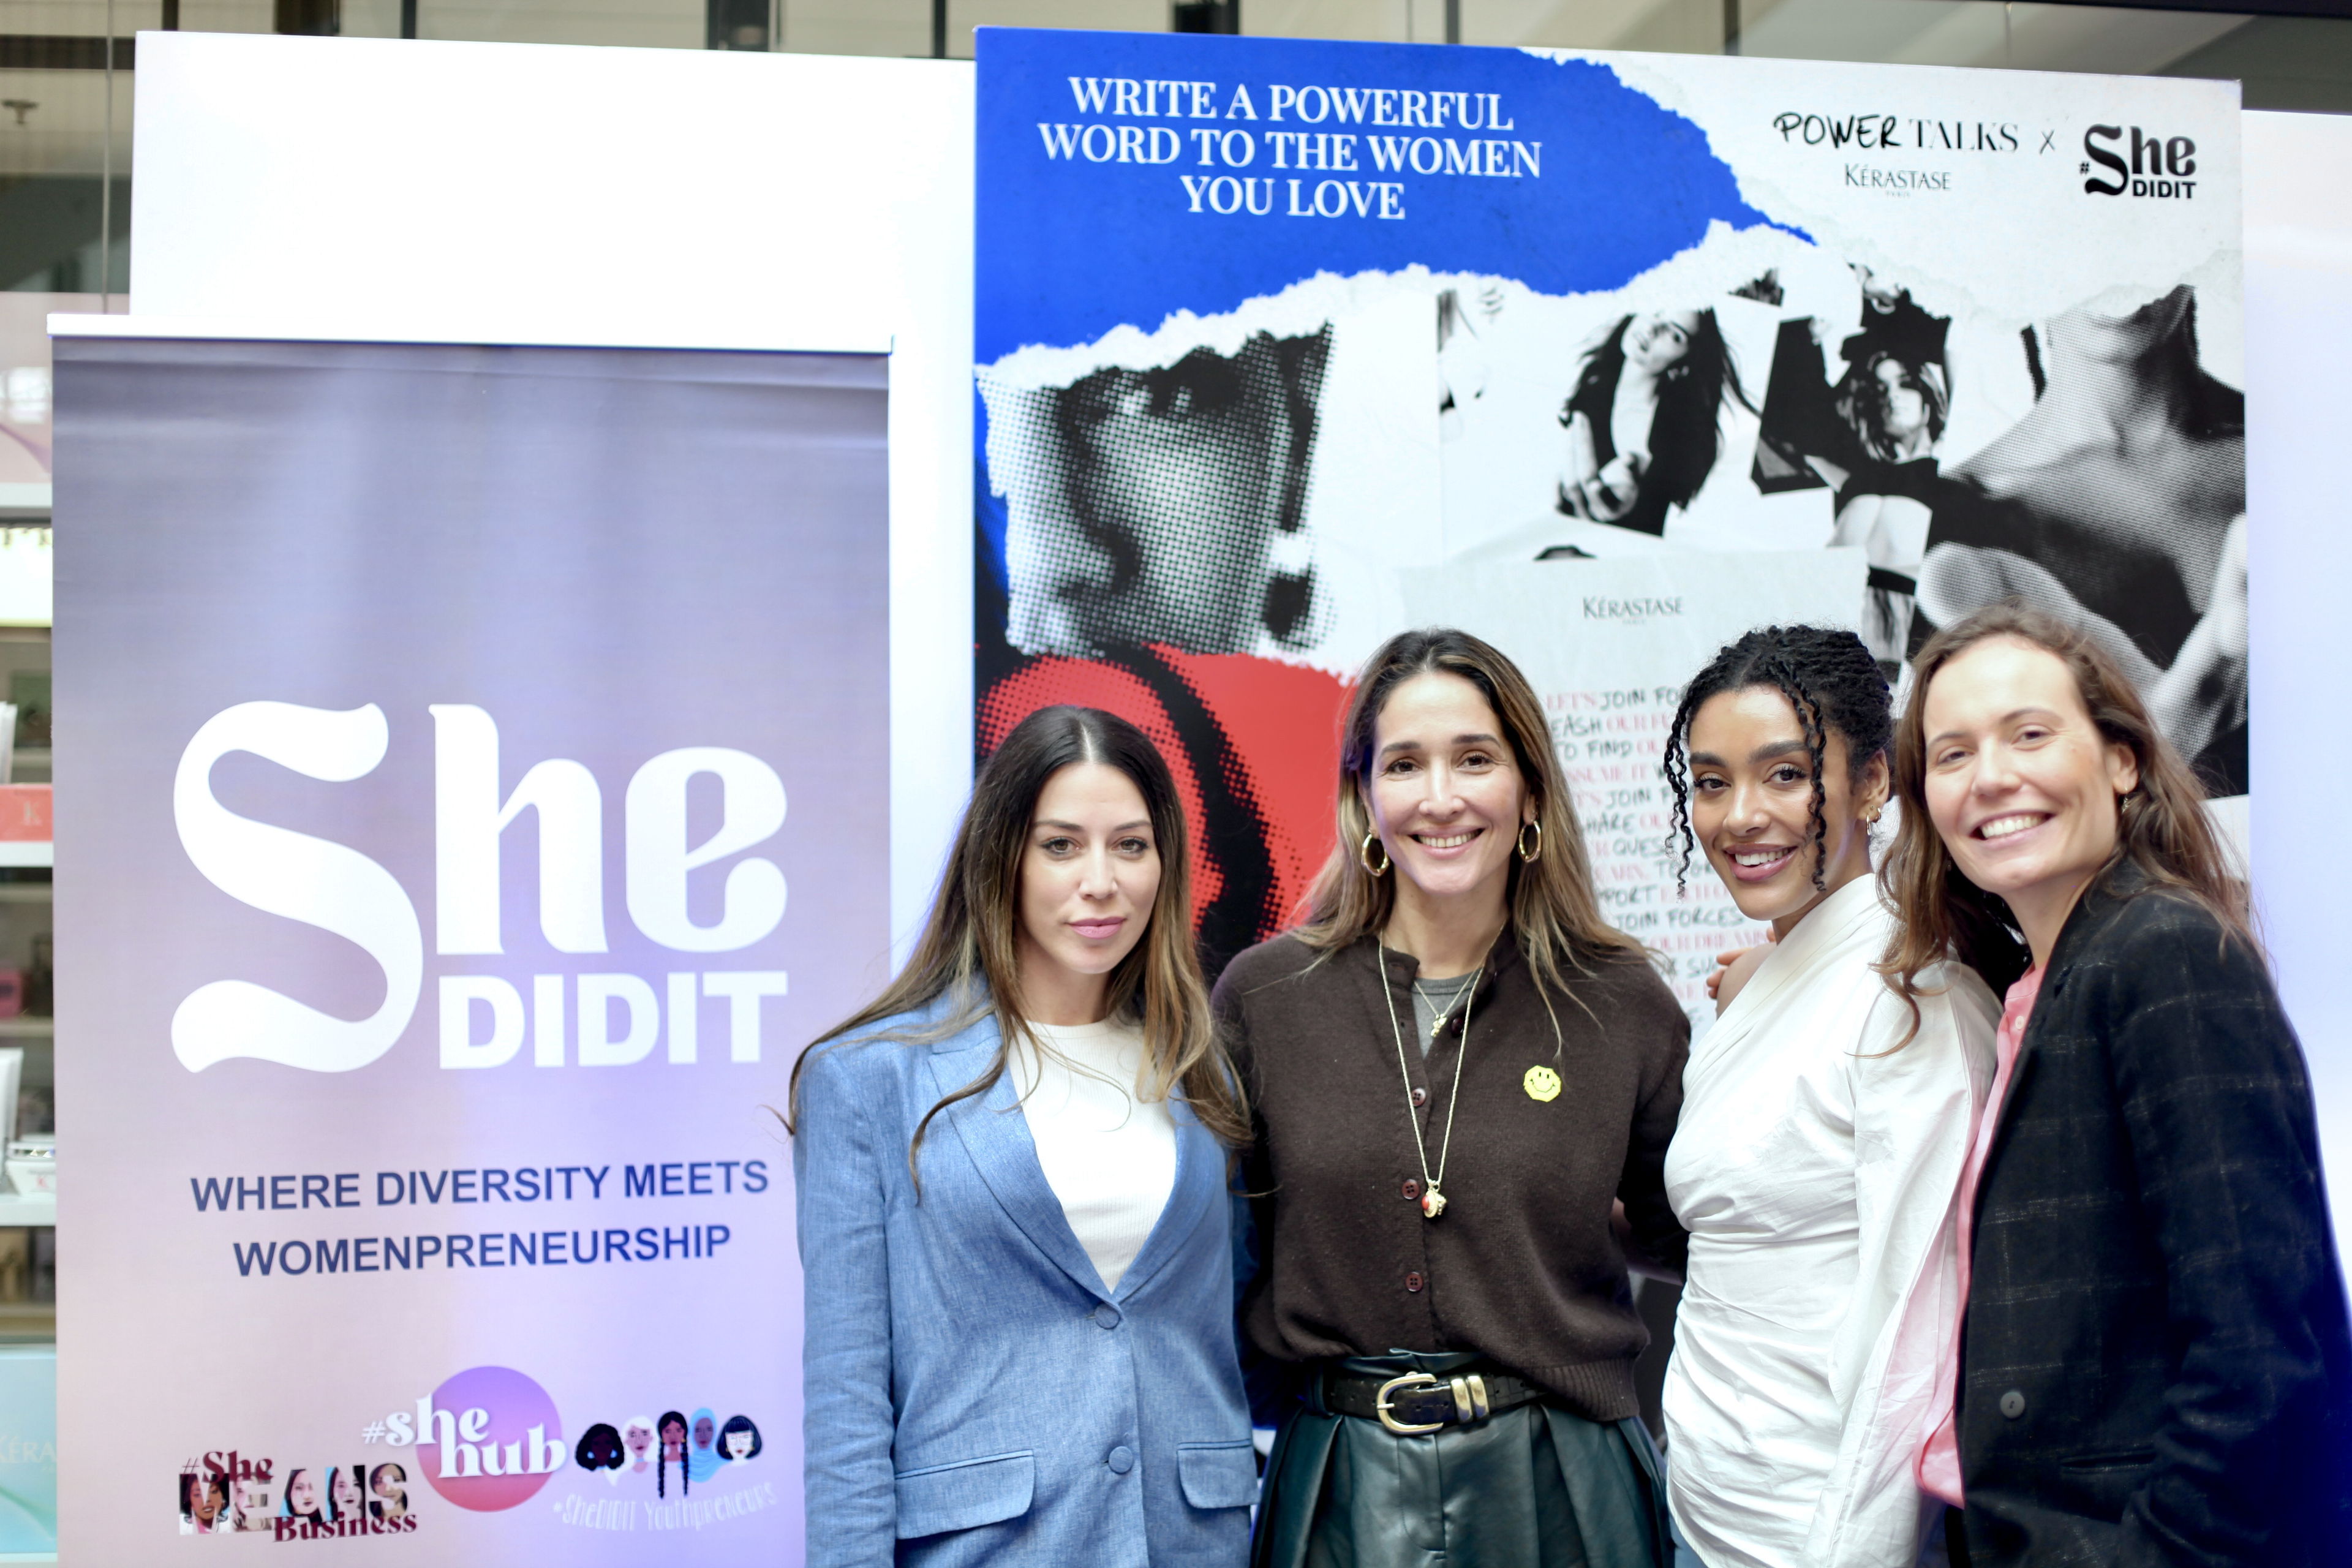 Empowering Women: Kérastase and #SheDIDIT PowerTalks Panel Discussion Highlights Confidence, Mentorship, and Vulnerability